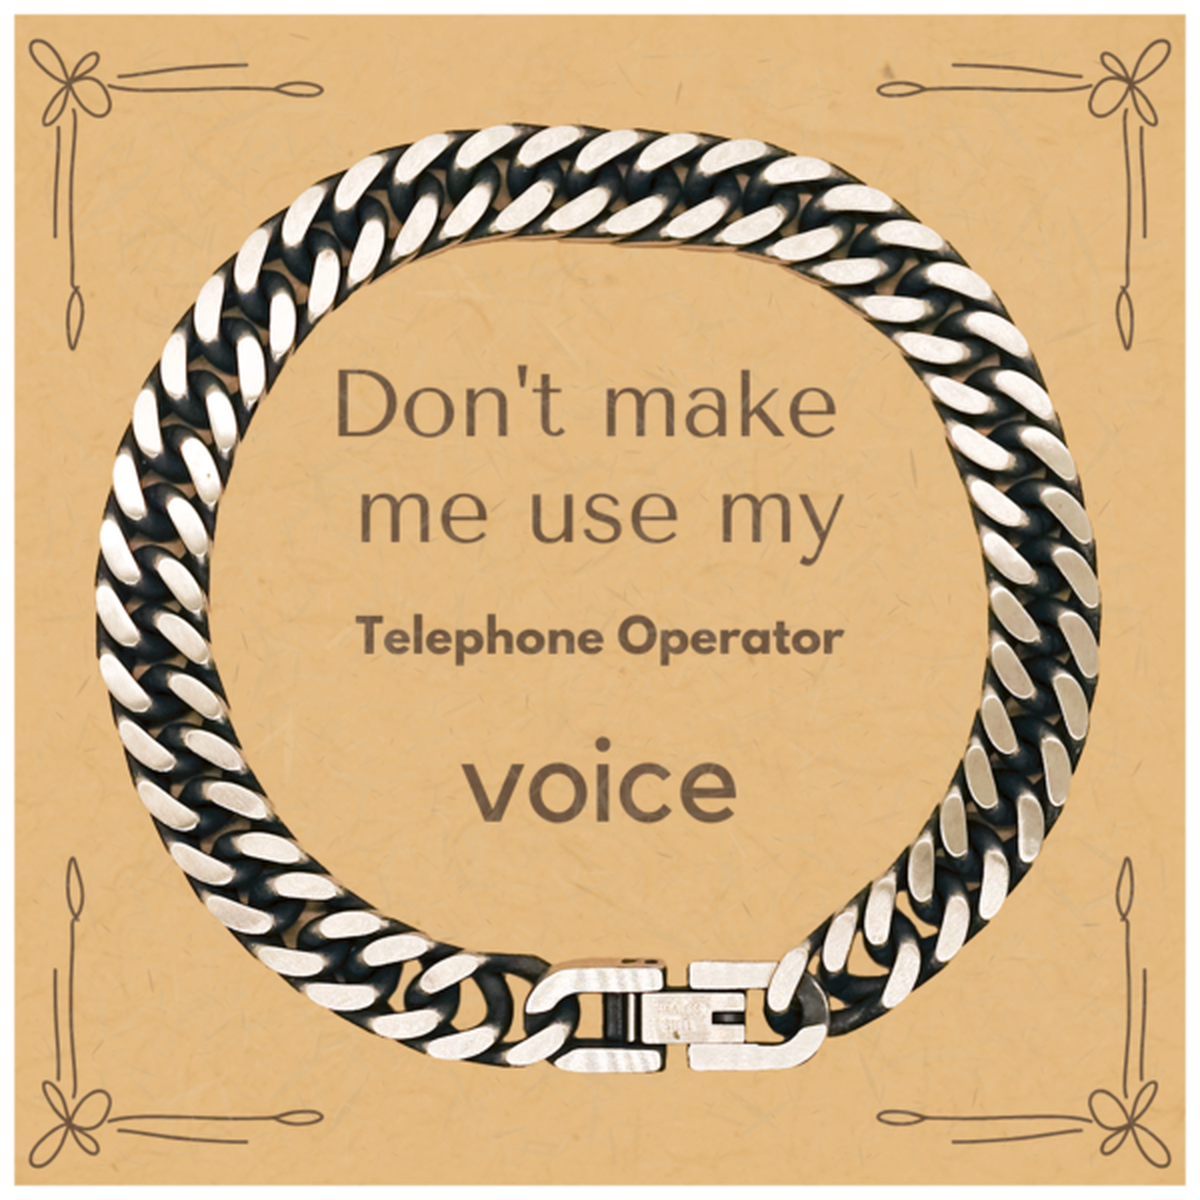 Don't make me use my Telephone Operator voice, Sarcasm Telephone Operator Card Gifts, Christmas Telephone Operator Cuban Link Chain Bracelet Birthday Unique Gifts For Telephone Operator Coworkers, Men, Women, Colleague, Friends